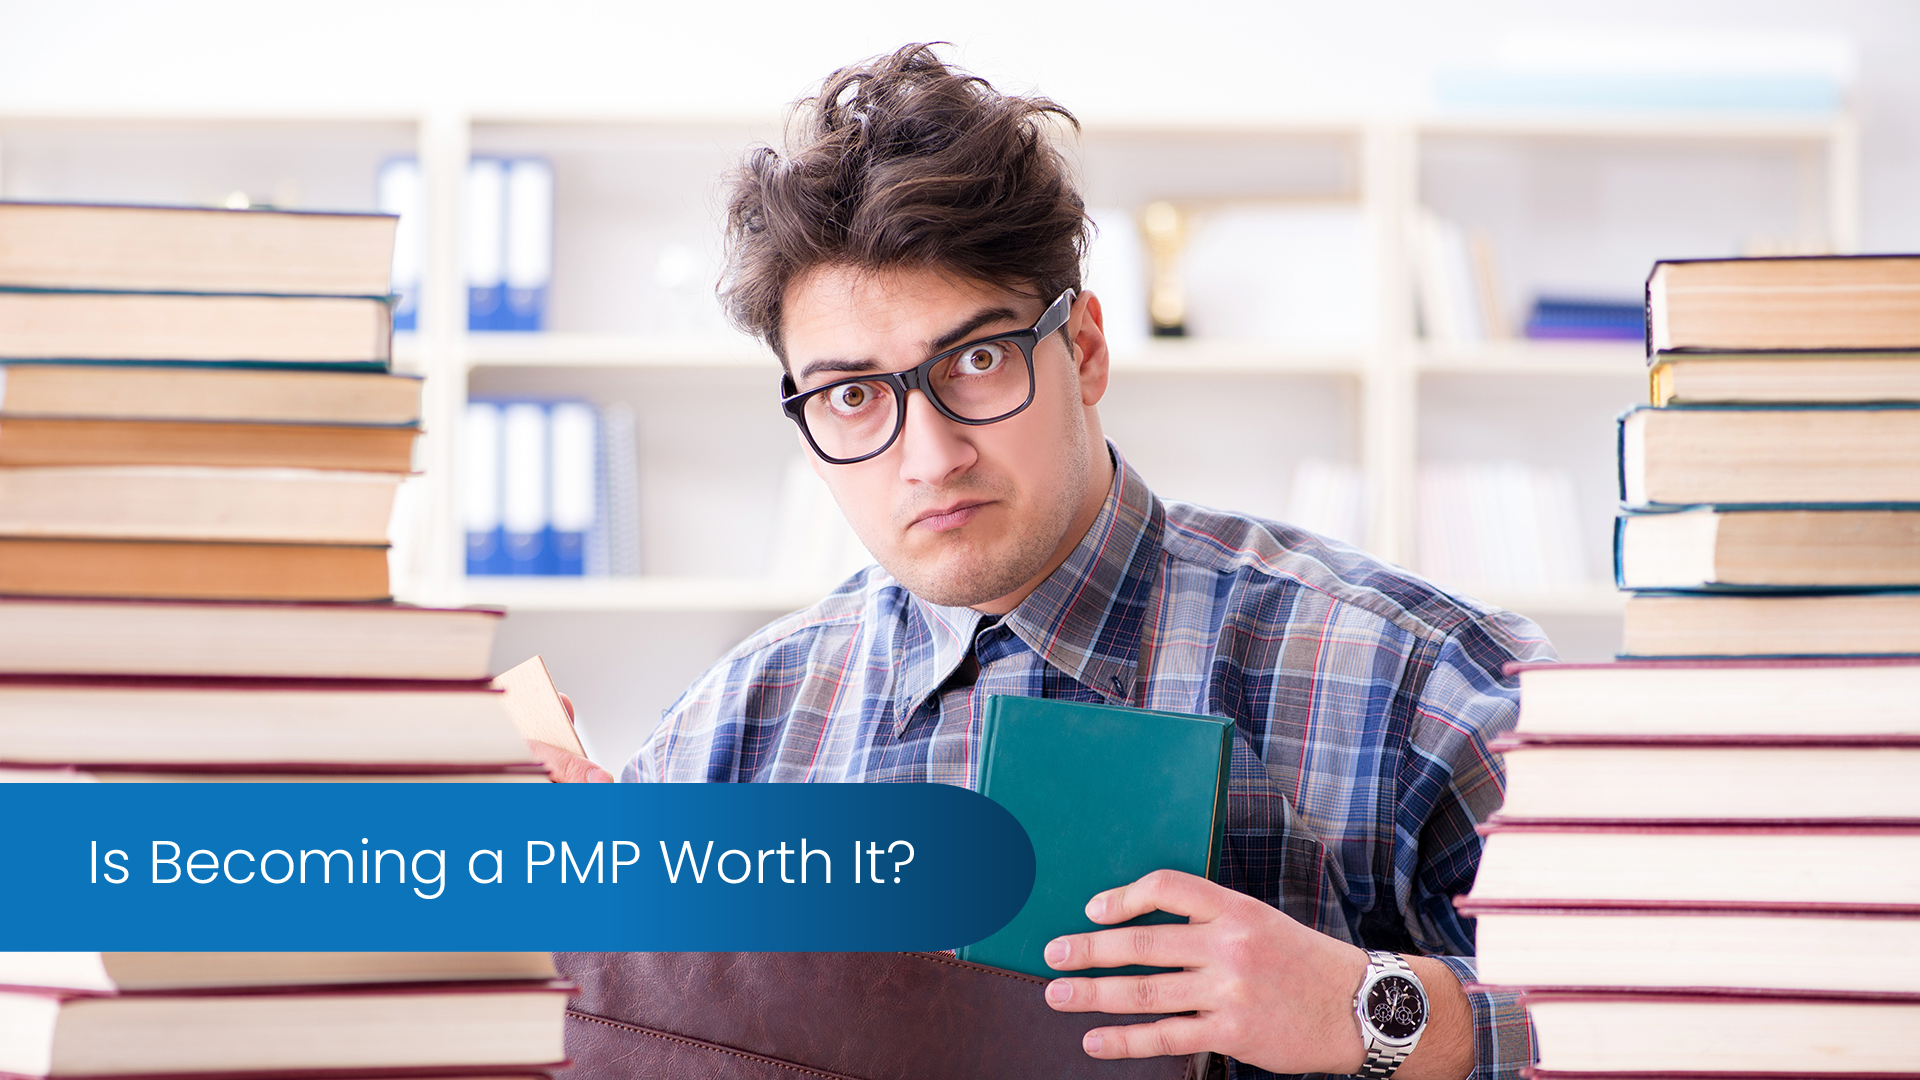 Is Becoming a PMP Worth It?